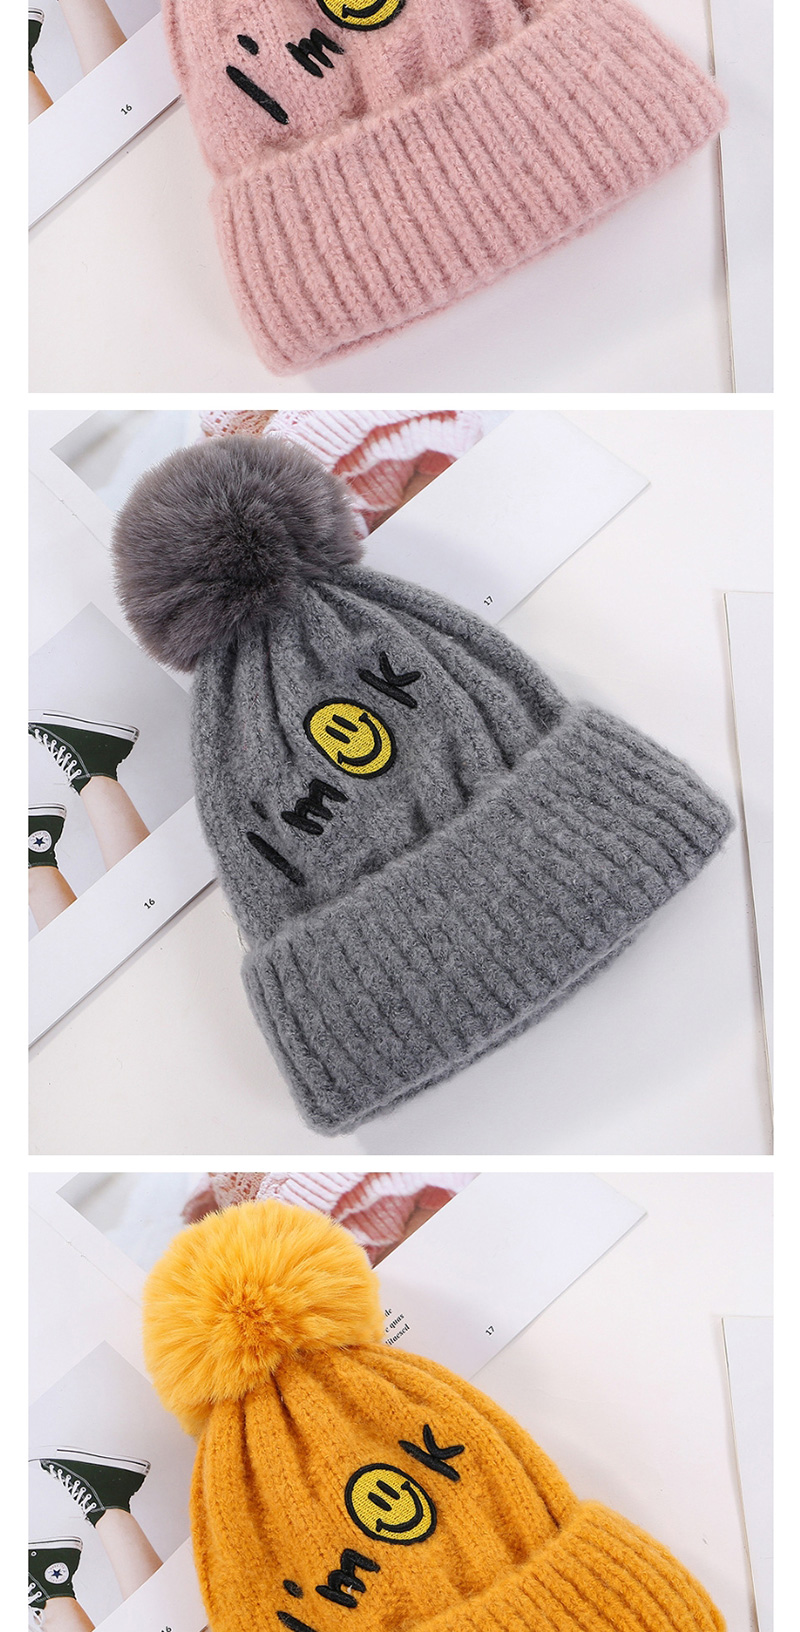 Fashion White Embroidered Smiley Letters Plus Velvet Knitted Hat,Knitting Wool Hats